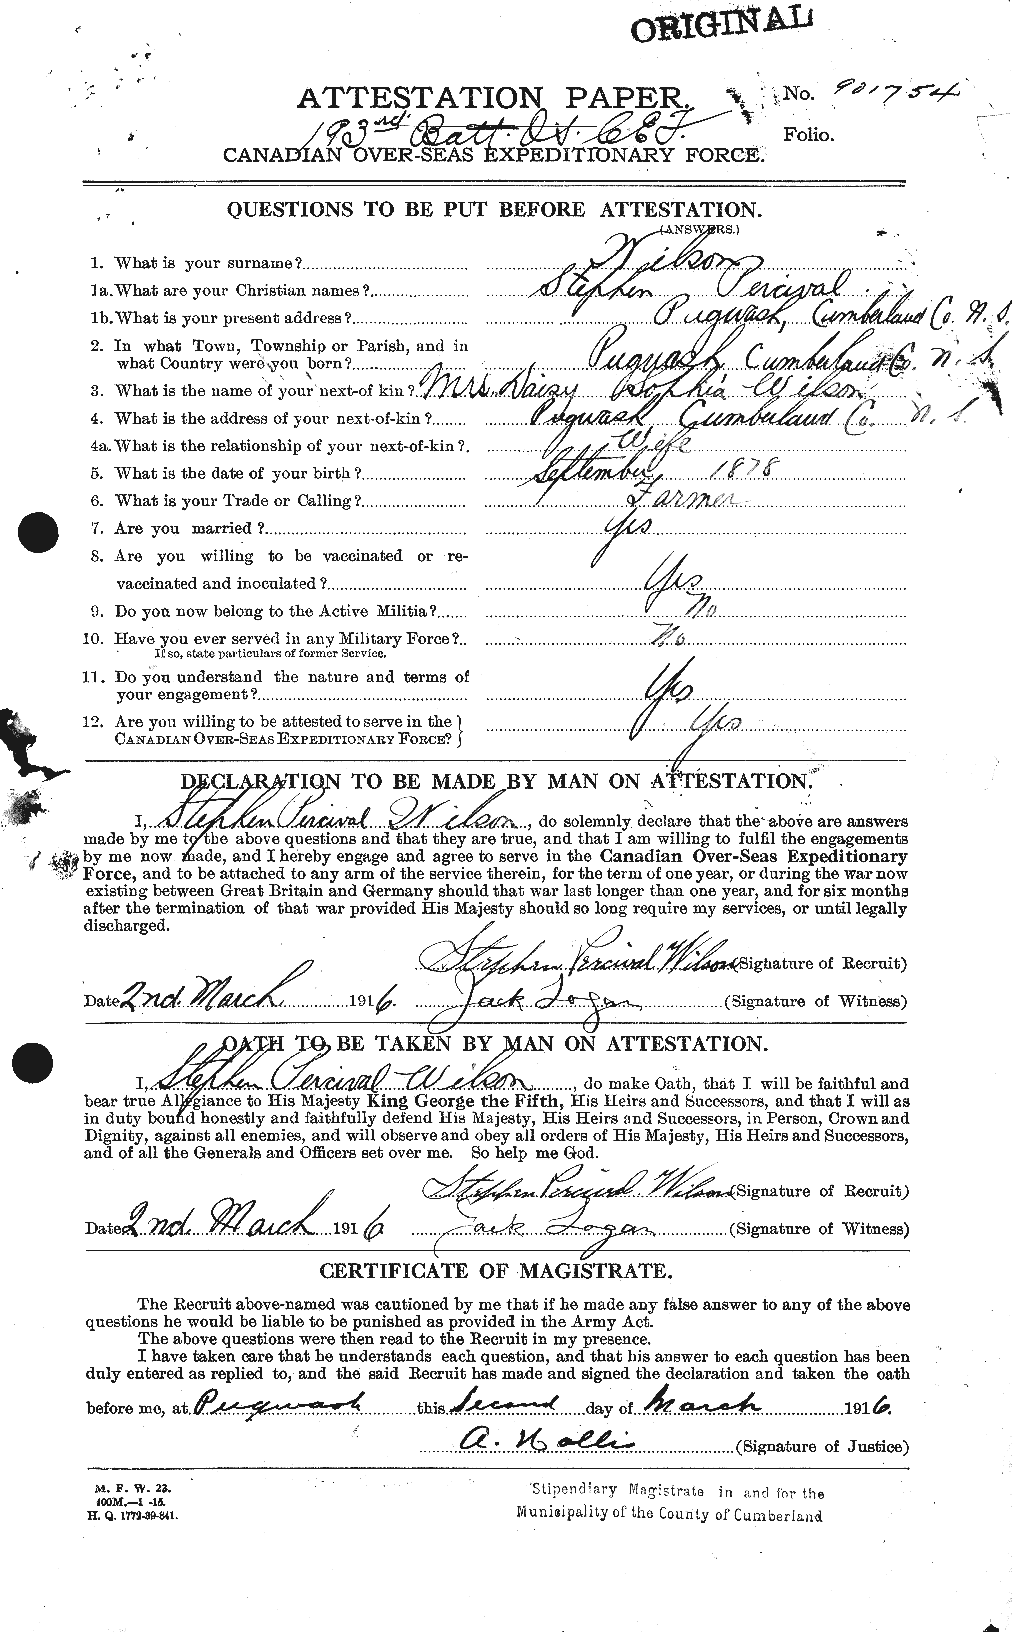 Personnel Records of the First World War - CEF 681150a